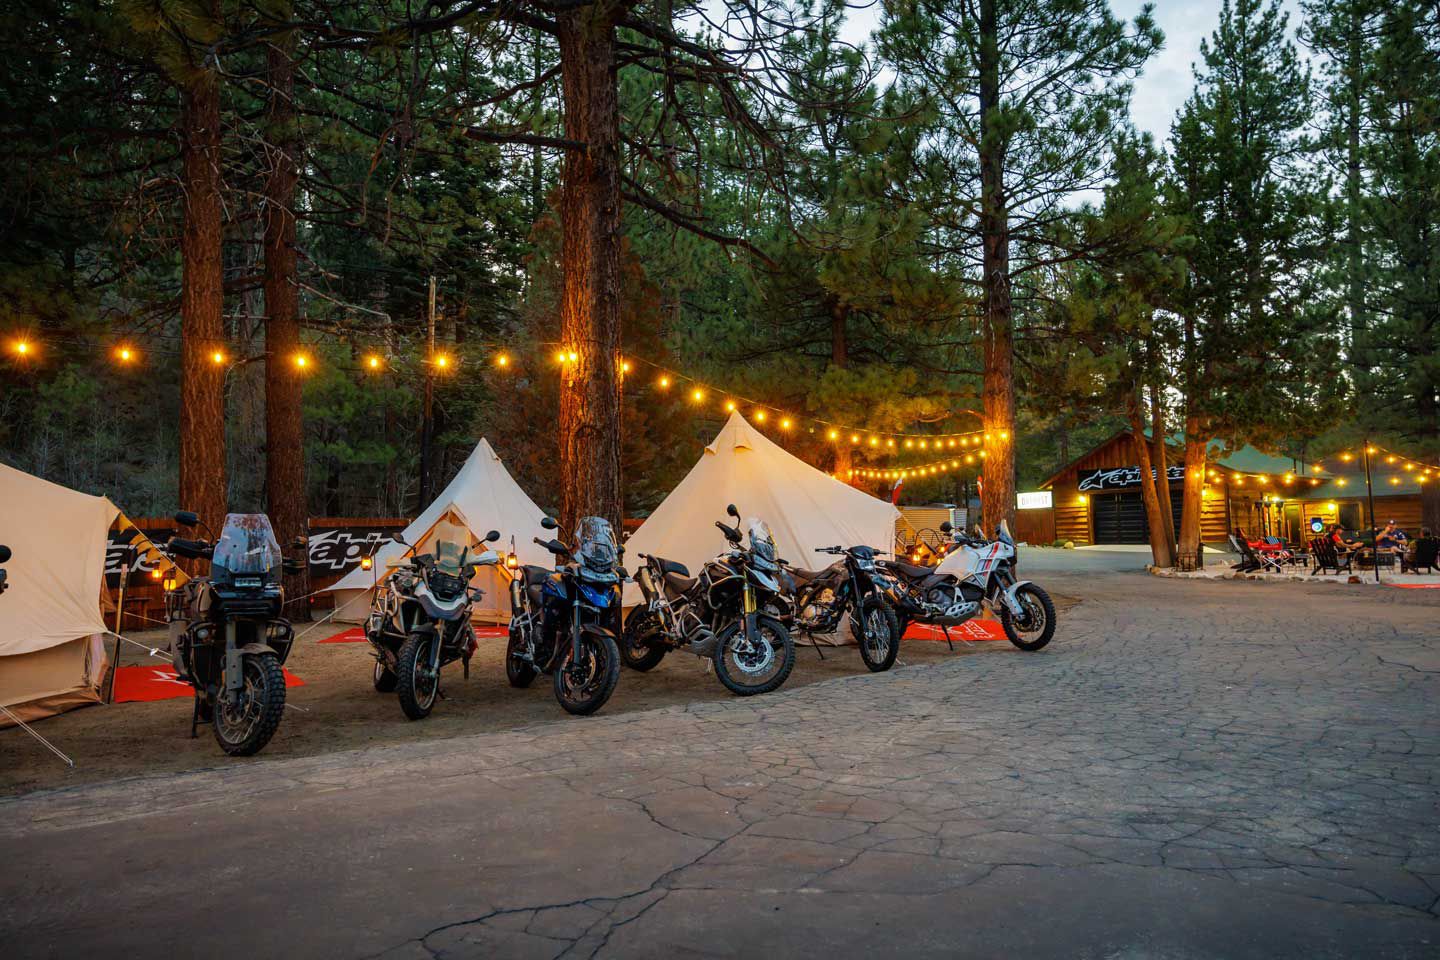 Alpinestars USA hosted its inaugural adventure tour to show off its latest adventure-touring and off-road wares for 2023.